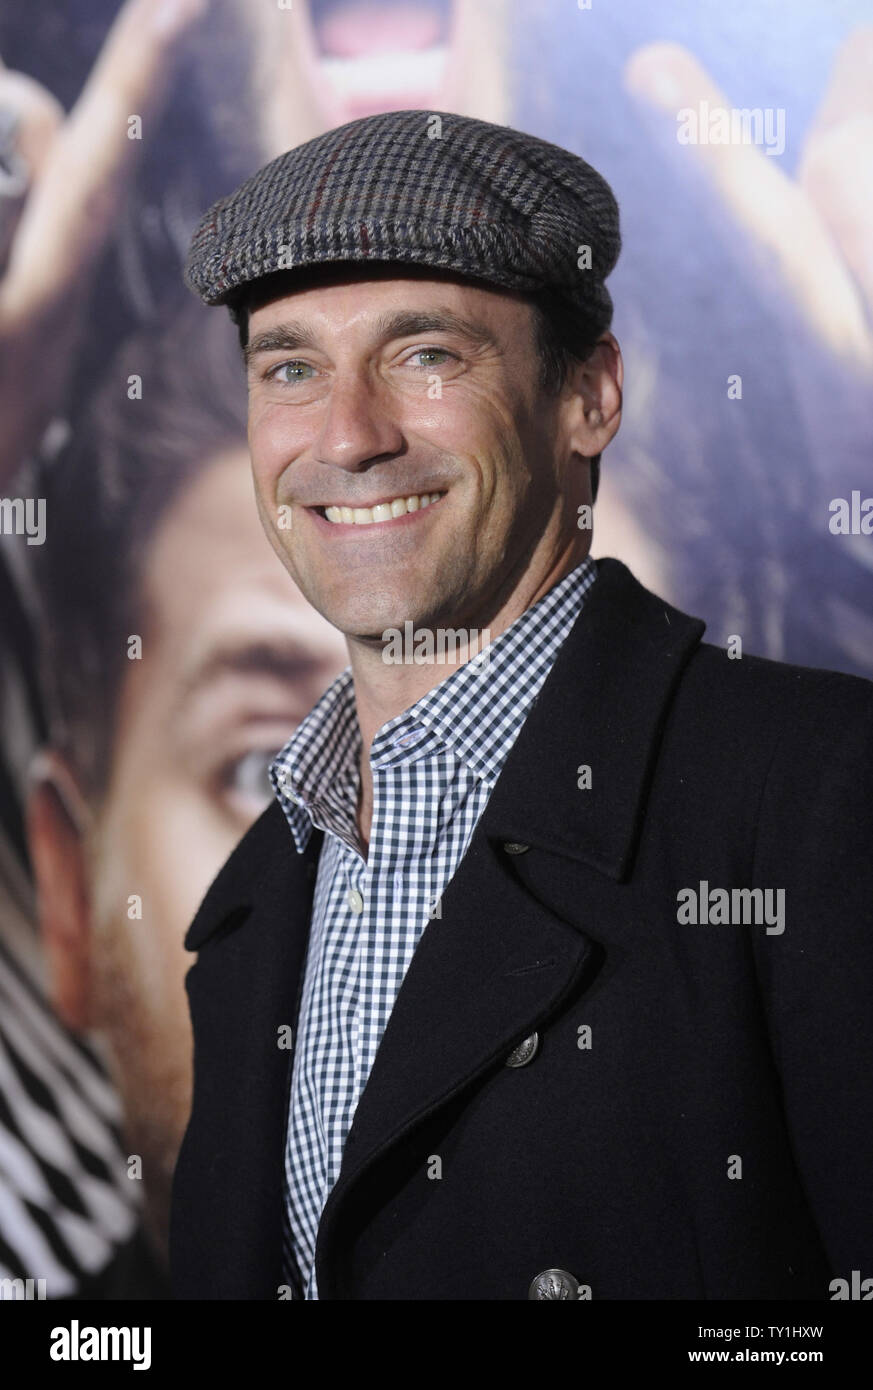 Actor Jon Hamm attends the premiere of the film 'Get Him to the Greek' at the Greek Theatre in Los Angeles on May 25, 2010.      UPI Photo/ Phil McCarten Stock Photo